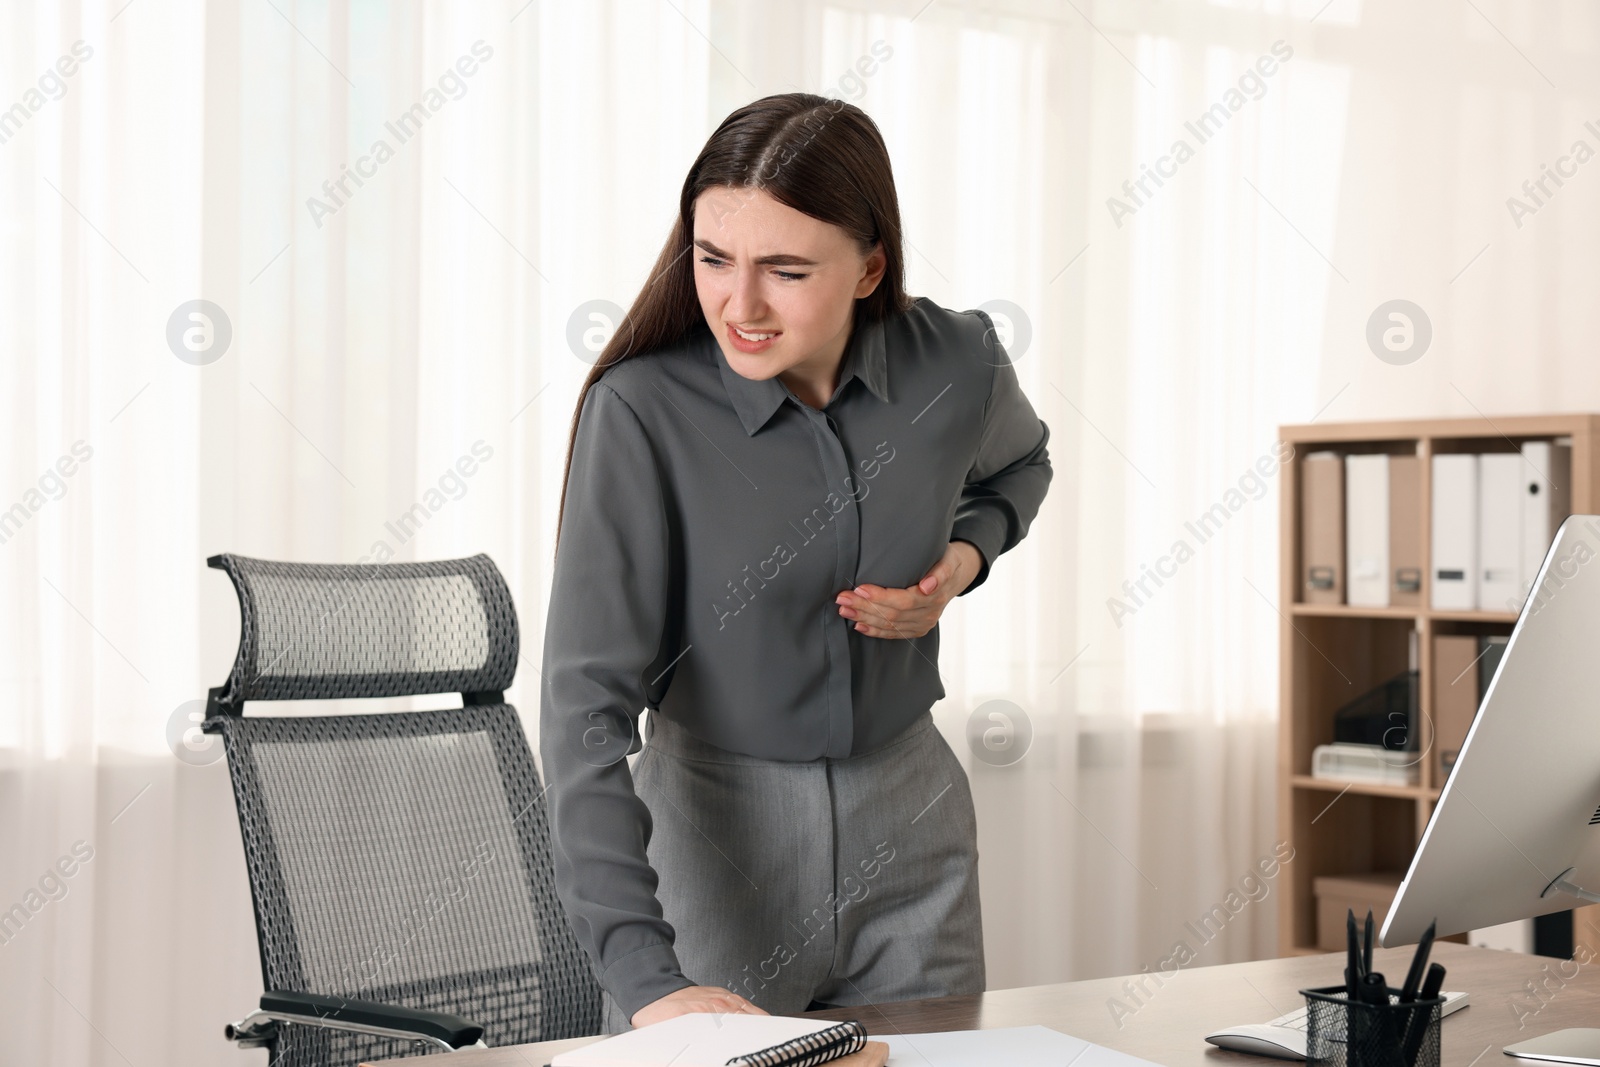 Photo of Woman having heart attack near table in office